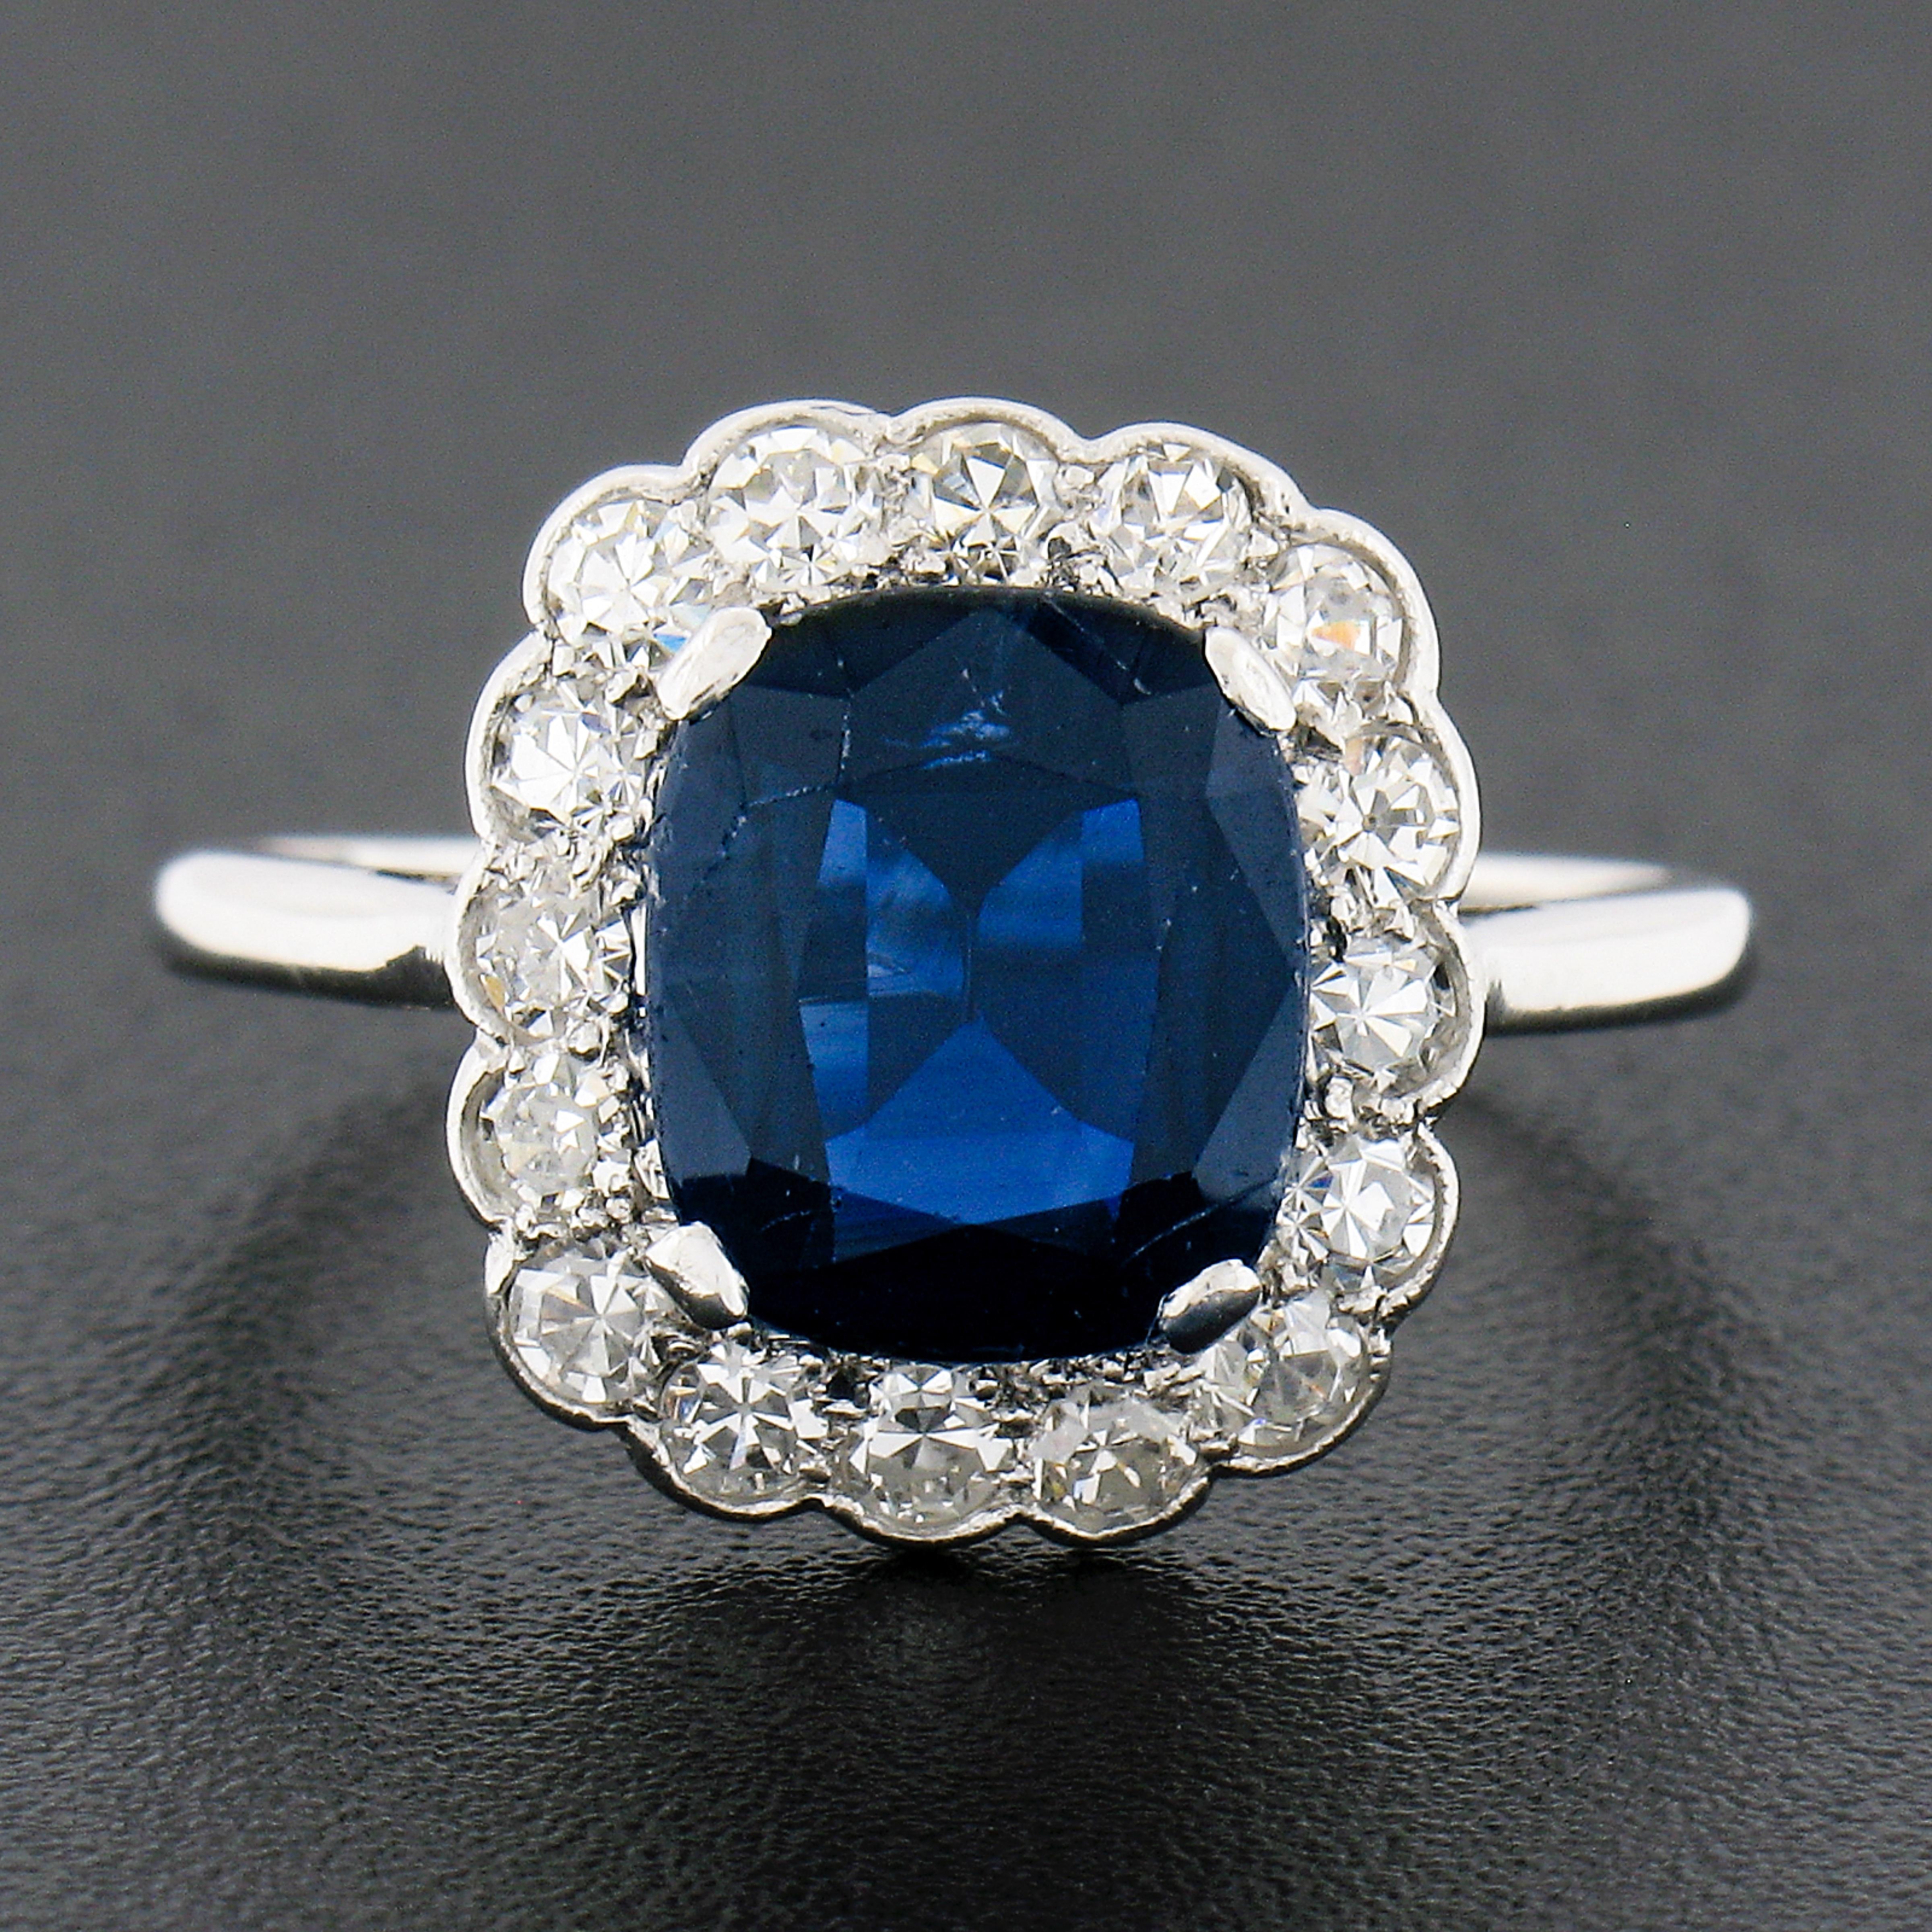 You are looking at a truly breathtaking antique sapphire and diamond ring that was crafted during the Edwardian period from solid 18k white gold and platinum. The ring features a gorgeous, cushion brilliant cut sapphire stone that is neatly prong